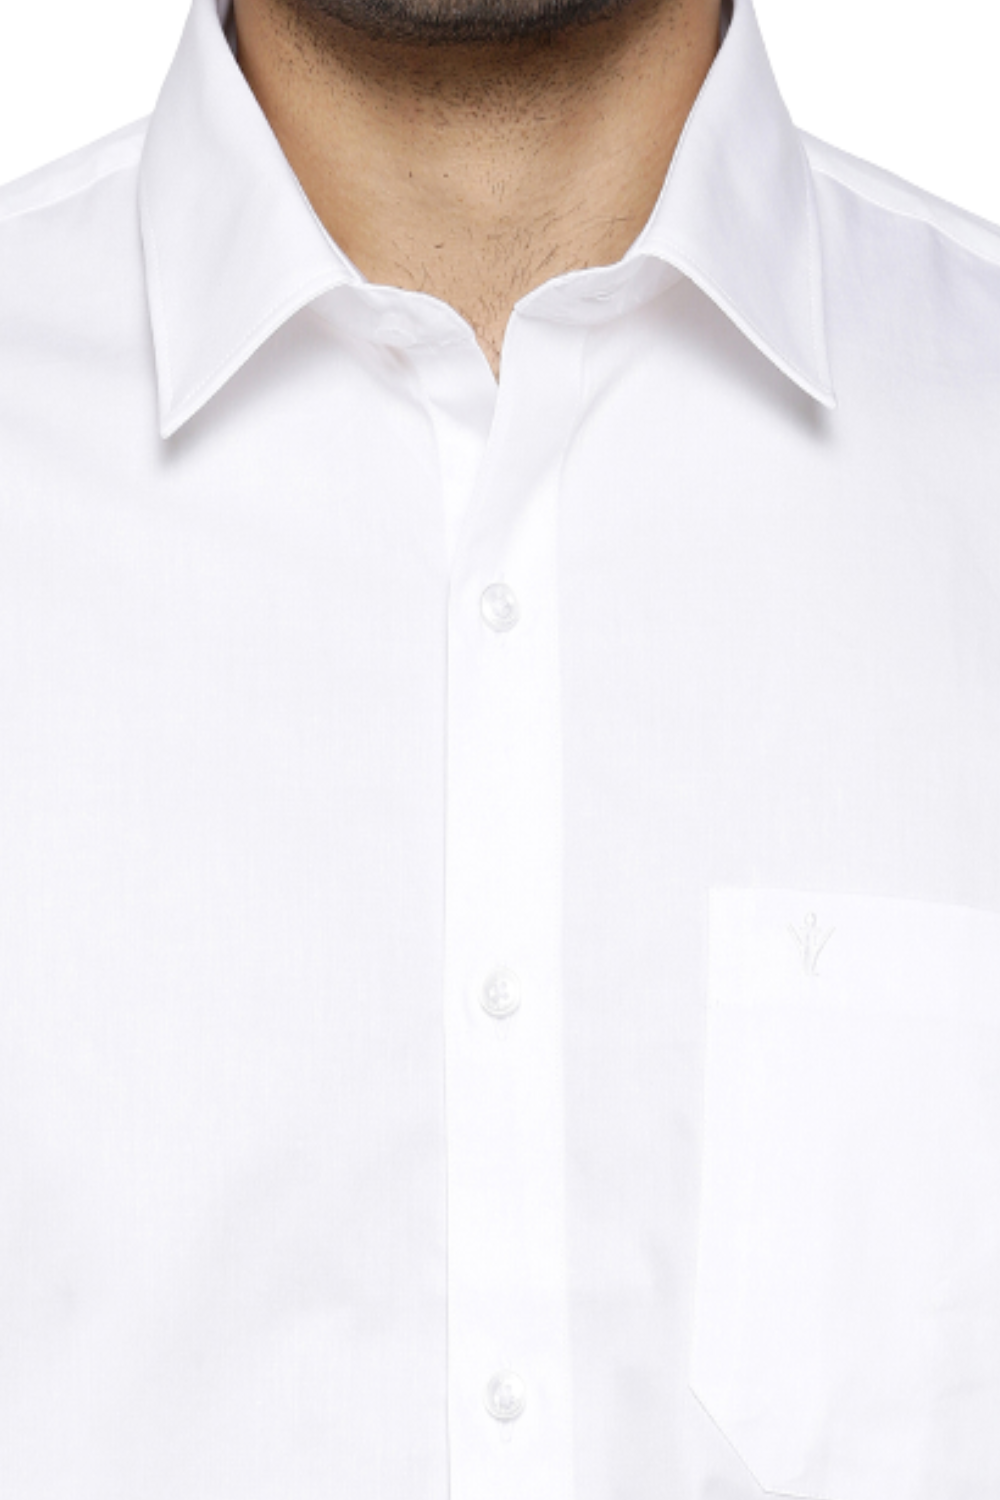 Mens 100% Cotton White Shirt Full Sleeves RR Image -Zoom view